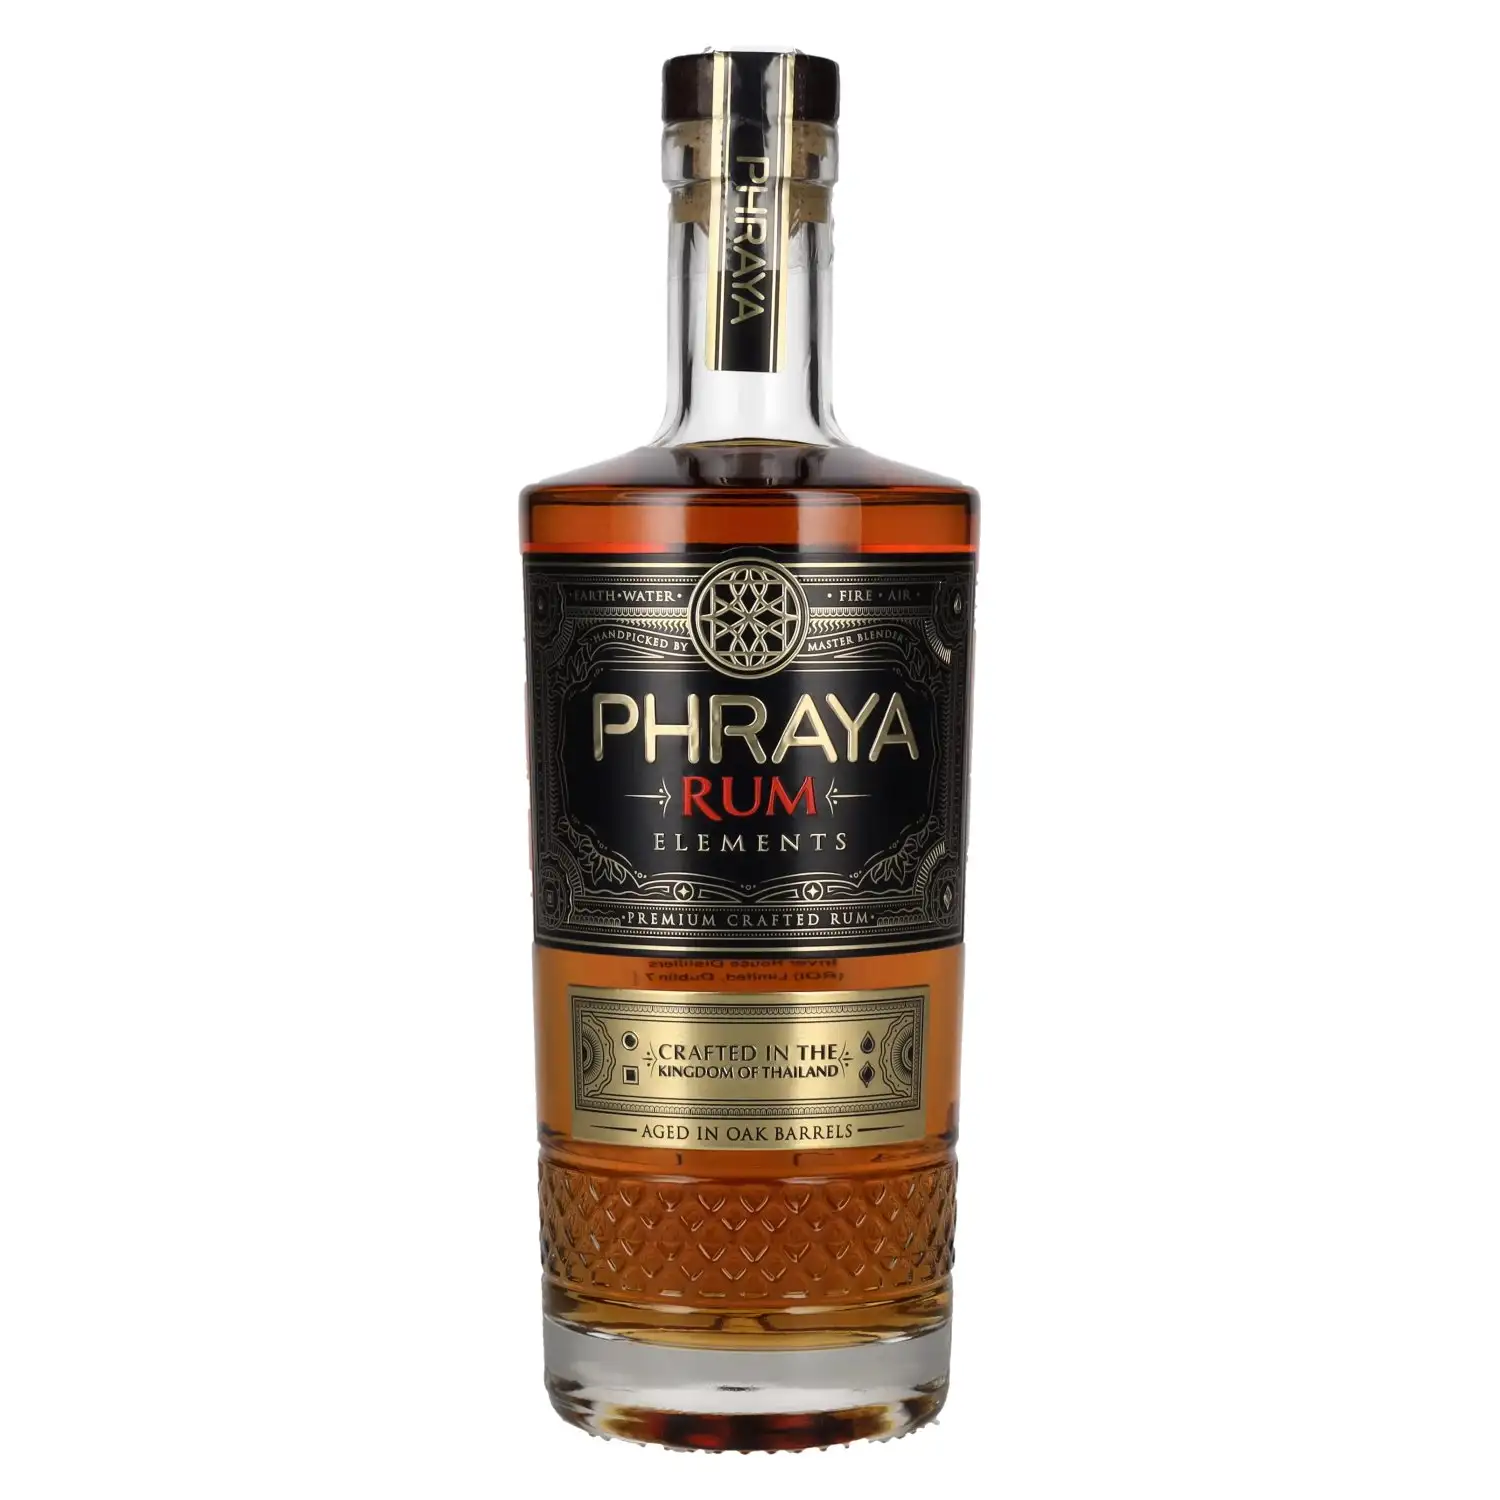 Image of the front of the bottle of the rum Phraya Elements